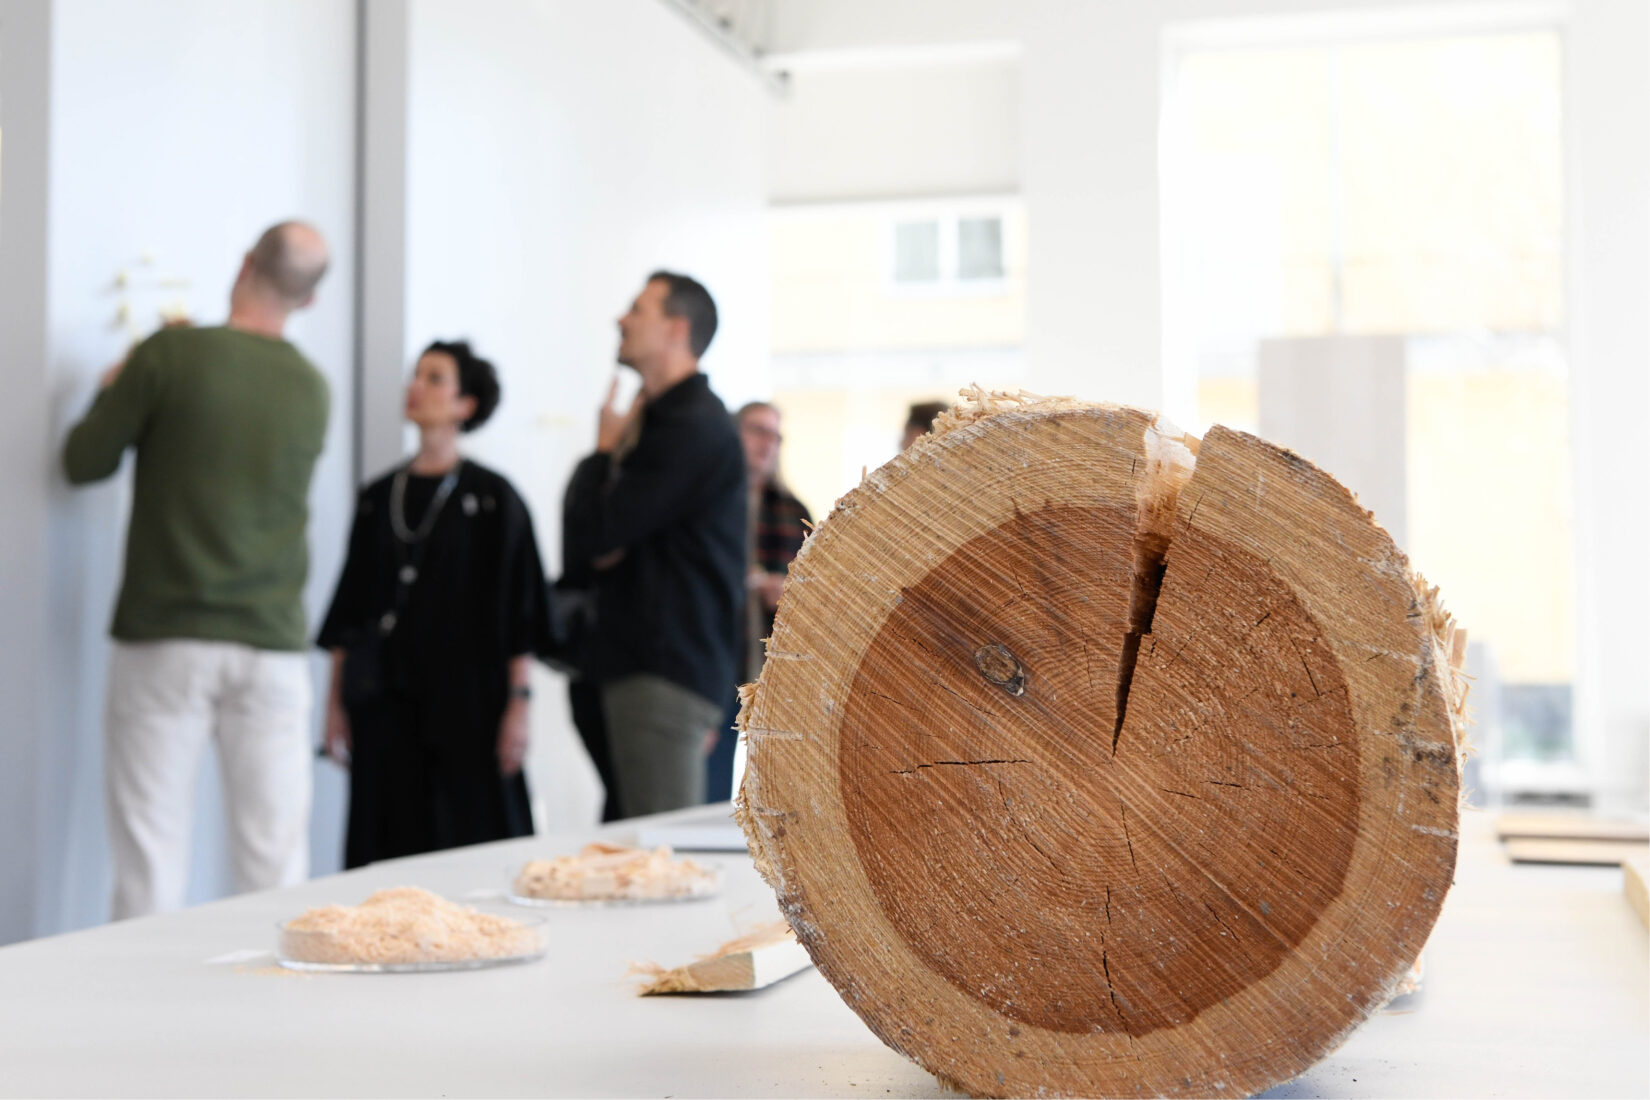 A tree trunk and different wooden prototypes are set on a table and people are discussing in the background.